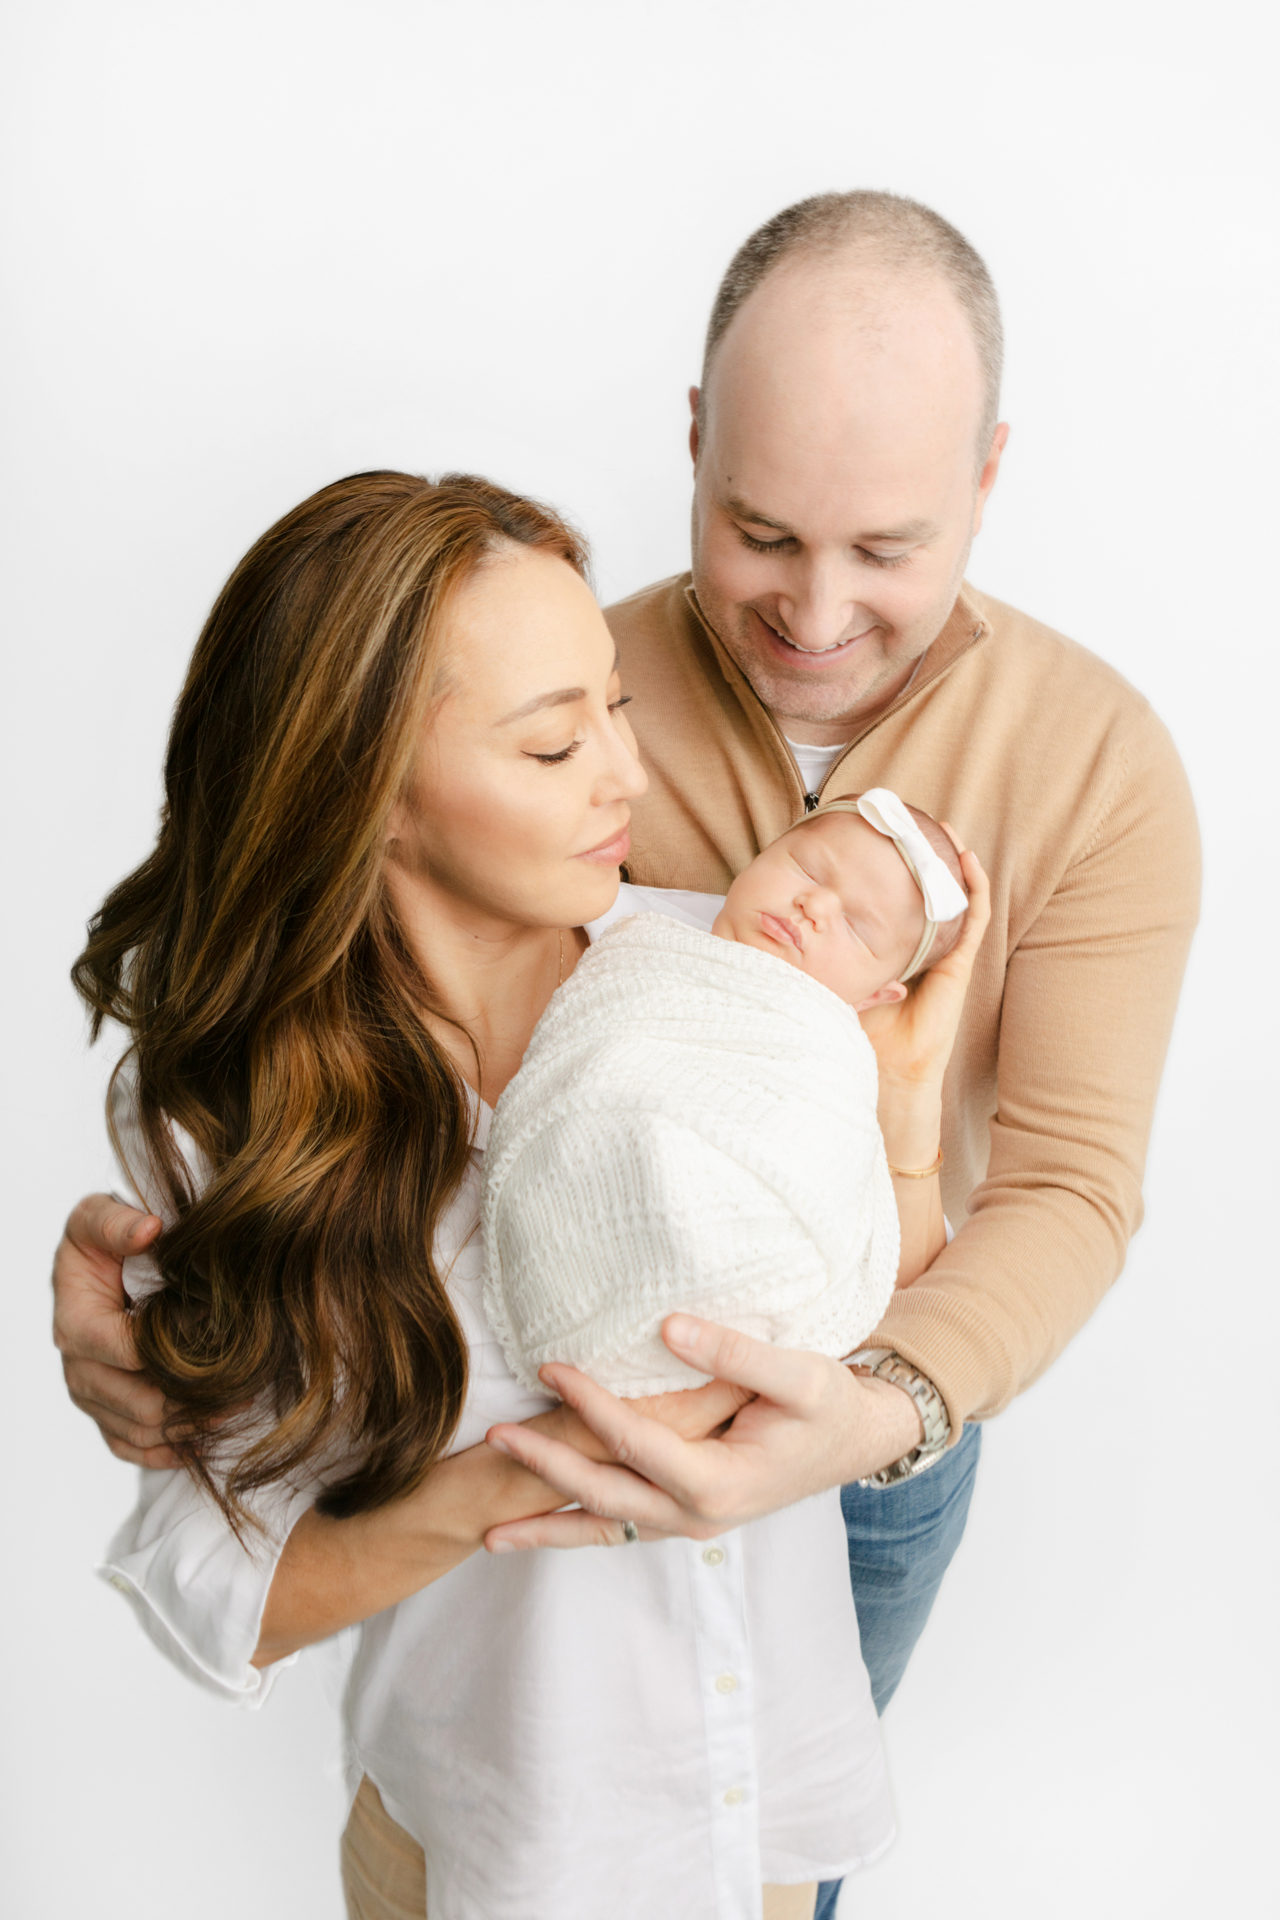 new family of three: mom, dad, and new baby girl named Emelia; neutral family newborn photography